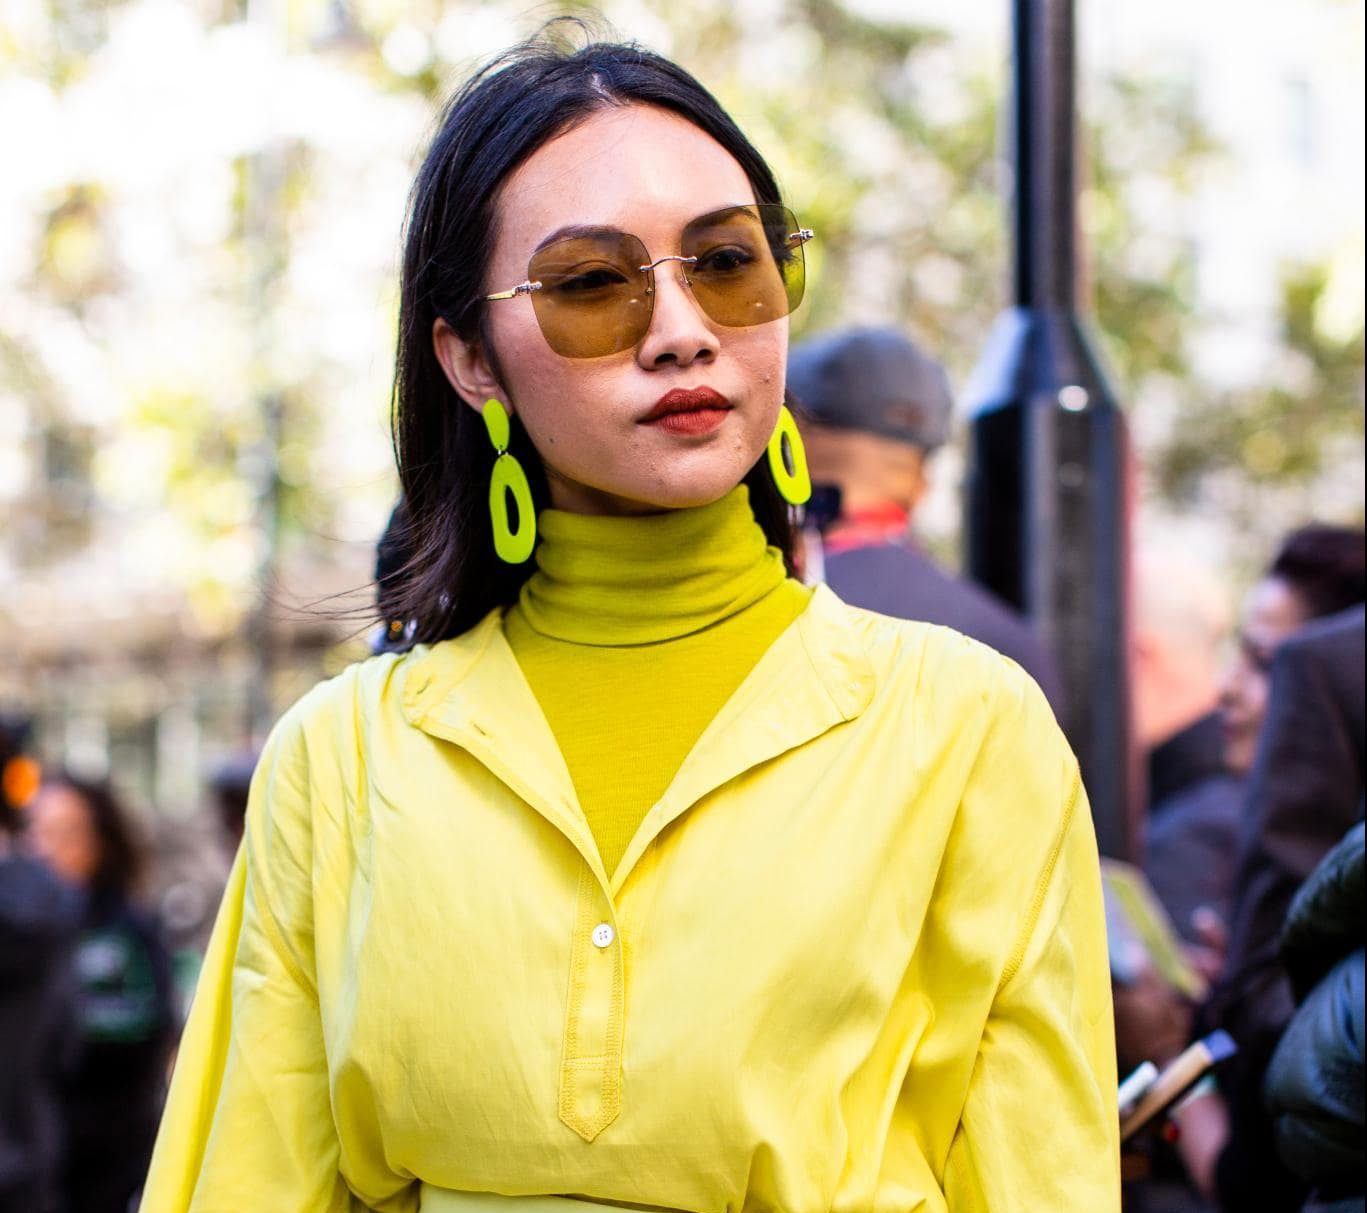 Totally Wearable Street Style Looks Spotted on the Streets of London ...